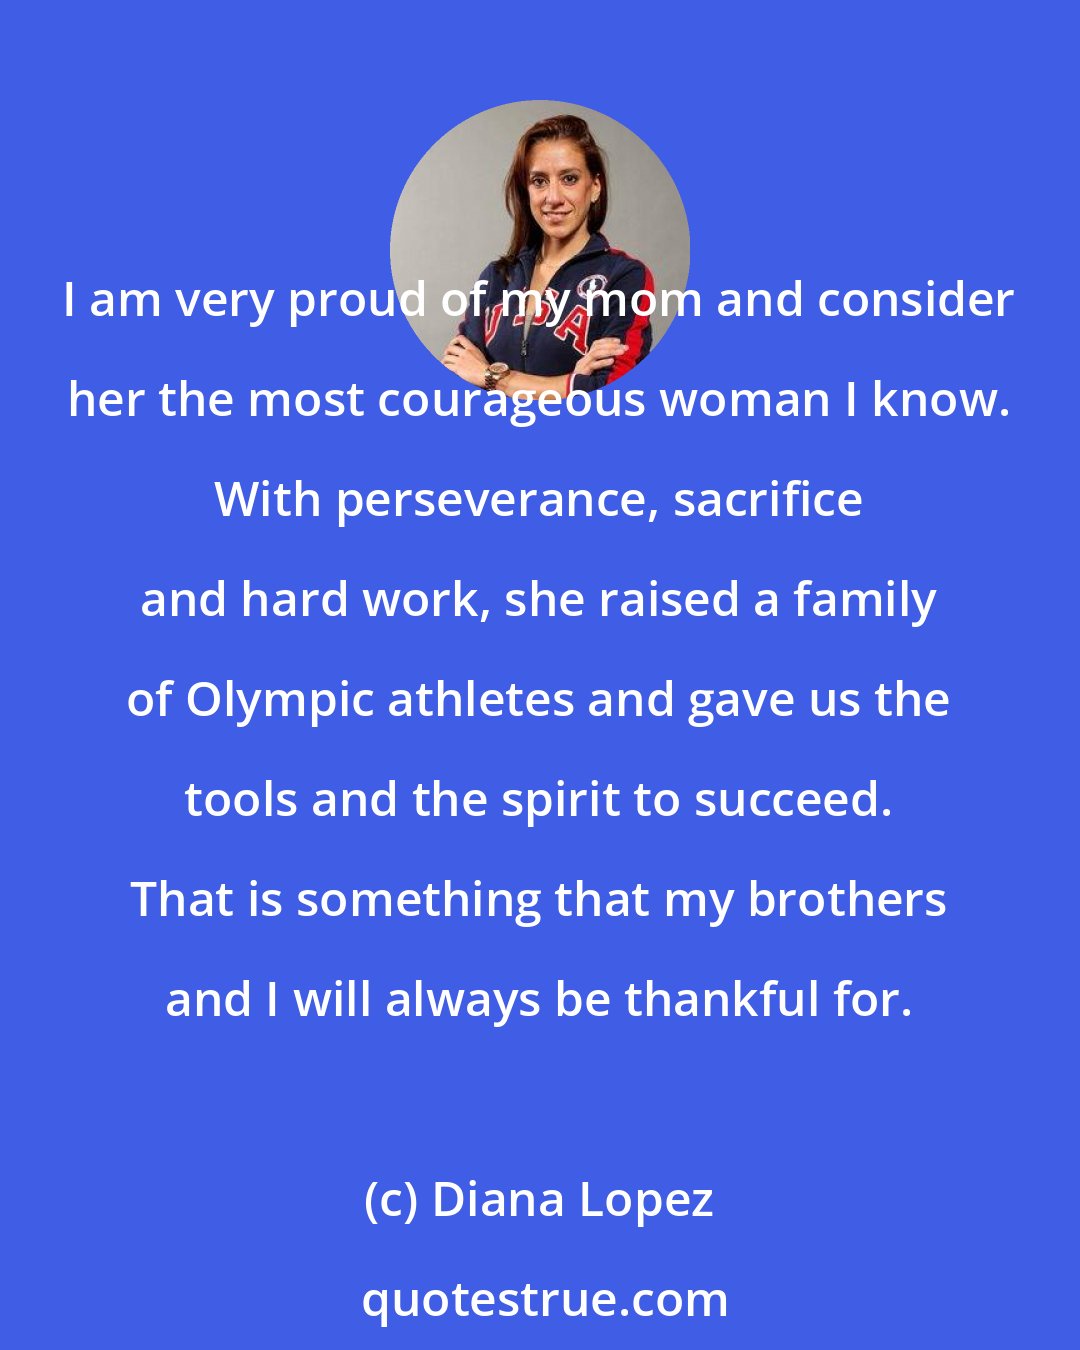 Diana Lopez: I am very proud of my mom and consider her the most courageous woman I know. With perseverance, sacrifice and hard work, she raised a family of Olympic athletes and gave us the tools and the spirit to succeed. That is something that my brothers and I will always be thankful for.